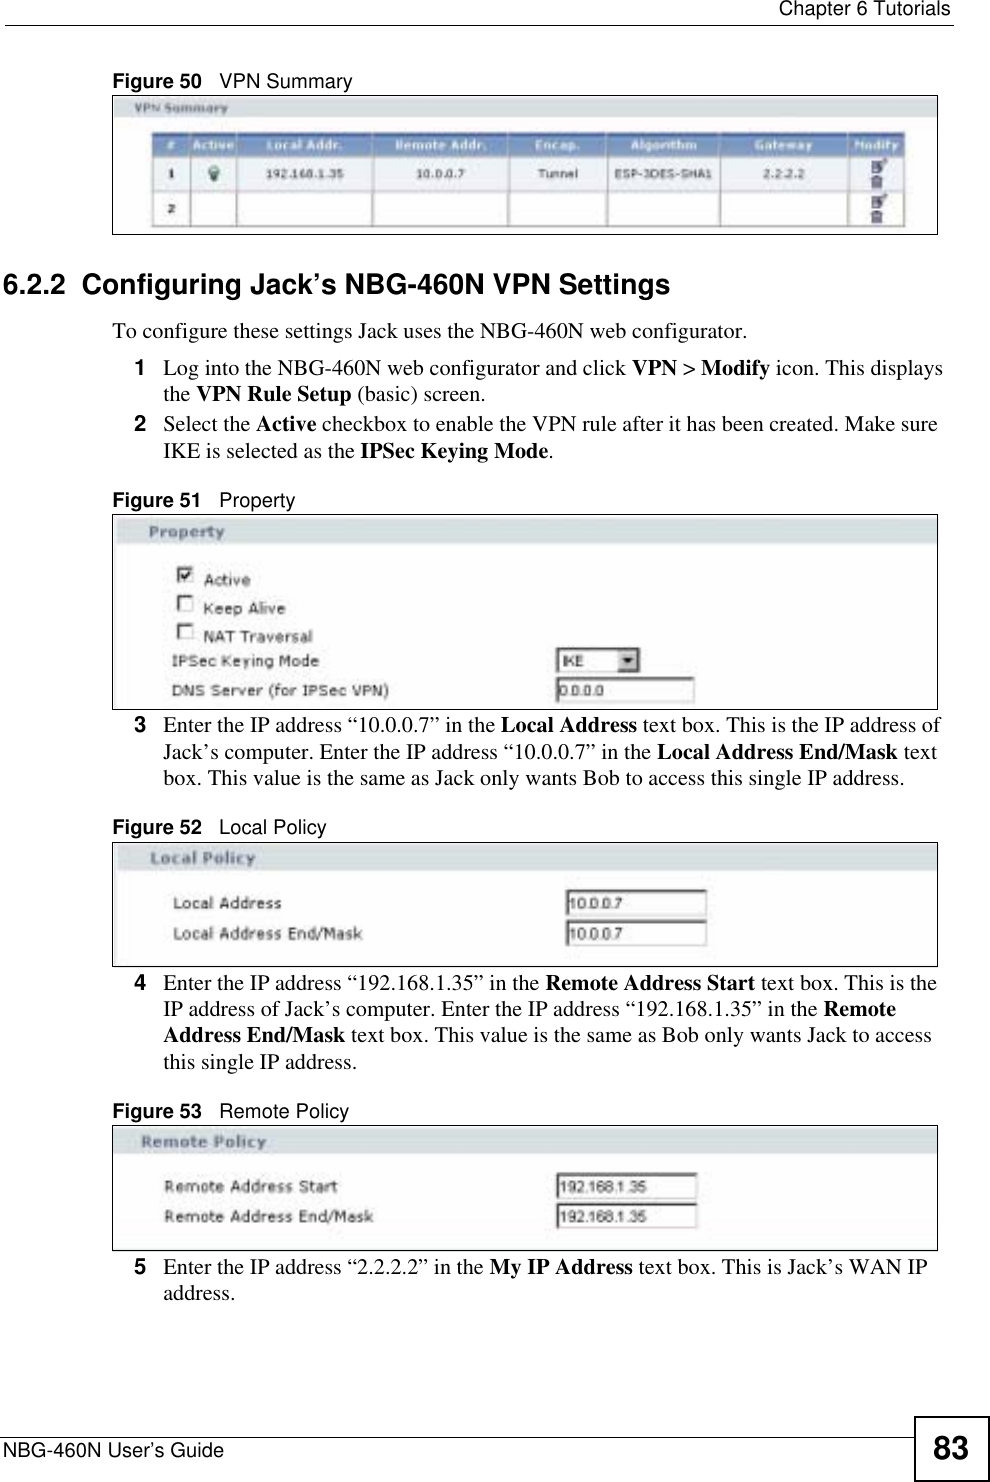  Chapter 6 TutorialsNBG-460N User’s Guide 83Figure 50   VPN Summary6.2.2  Configuring Jack’s NBG-460N VPN SettingsTo configure these settings Jack uses the NBG-460N web configurator.1Log into the NBG-460N web configurator and click VPN &gt; Modify icon. This displays the VPN Rule Setup (basic) screen.2Select the Active checkbox to enable the VPN rule after it has been created. Make sure IKE is selected as the IPSec Keying Mode.Figure 51   Property3Enter the IP address “10.0.0.7” in the Local Address text box. This is the IP address of Jack’s computer. Enter the IP address “10.0.0.7” in the Local Address End/Mask text box. This value is the same as Jack only wants Bob to access this single IP address.Figure 52   Local Policy4Enter the IP address “192.168.1.35” in the Remote Address Start text box. This is the IP address of Jack’s computer. Enter the IP address “192.168.1.35” in the Remote Address End/Mask text box. This value is the same as Bob only wants Jack to access this single IP address.Figure 53   Remote Policy5Enter the IP address “2.2.2.2” in the My IP Address text box. This is Jack’s WAN IP address.